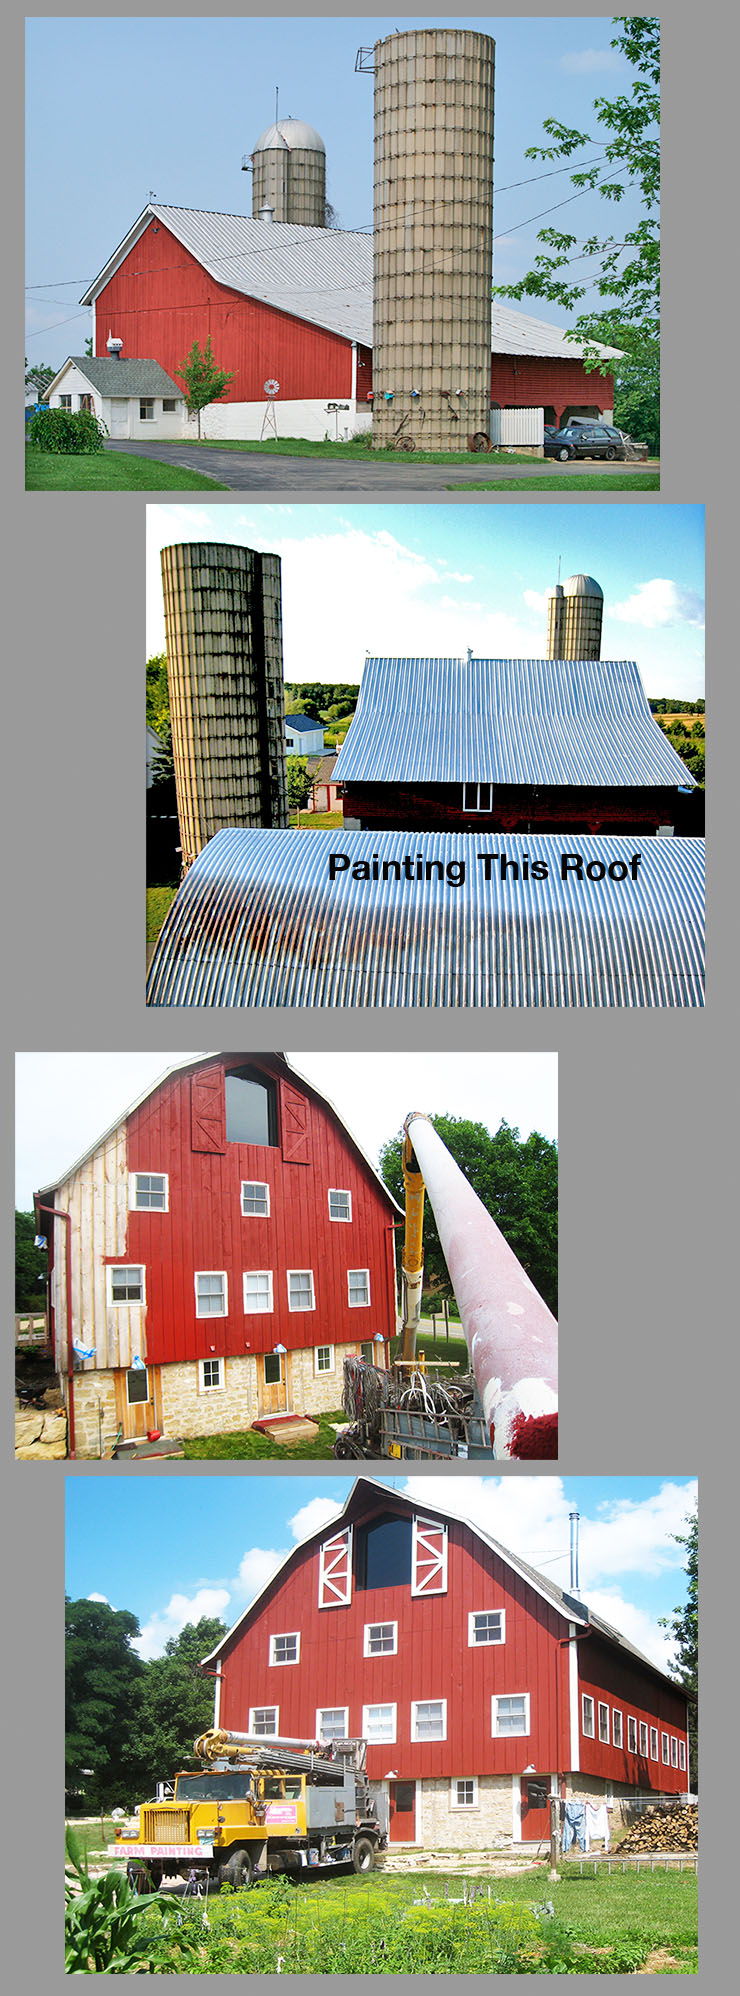 Farm Painting by Richard Arfsten satisfied clients